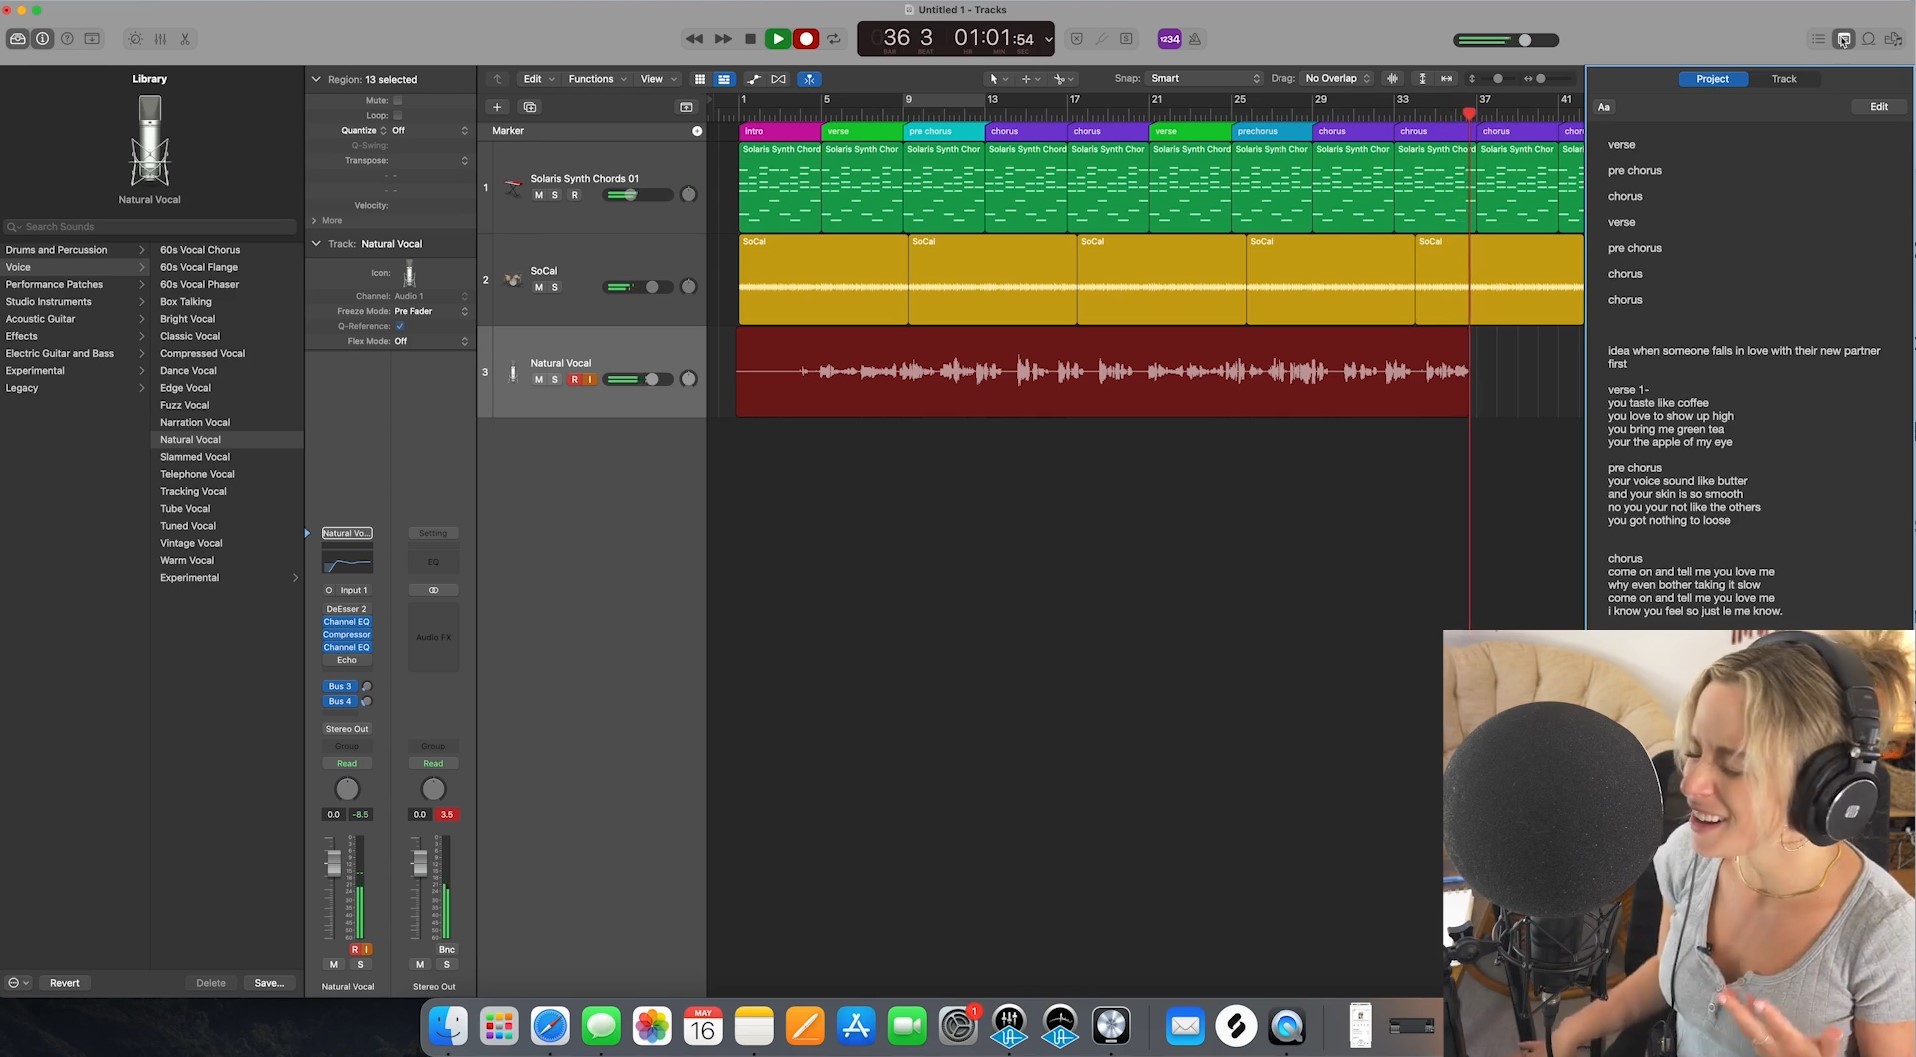 seids performing 3 in logic pro